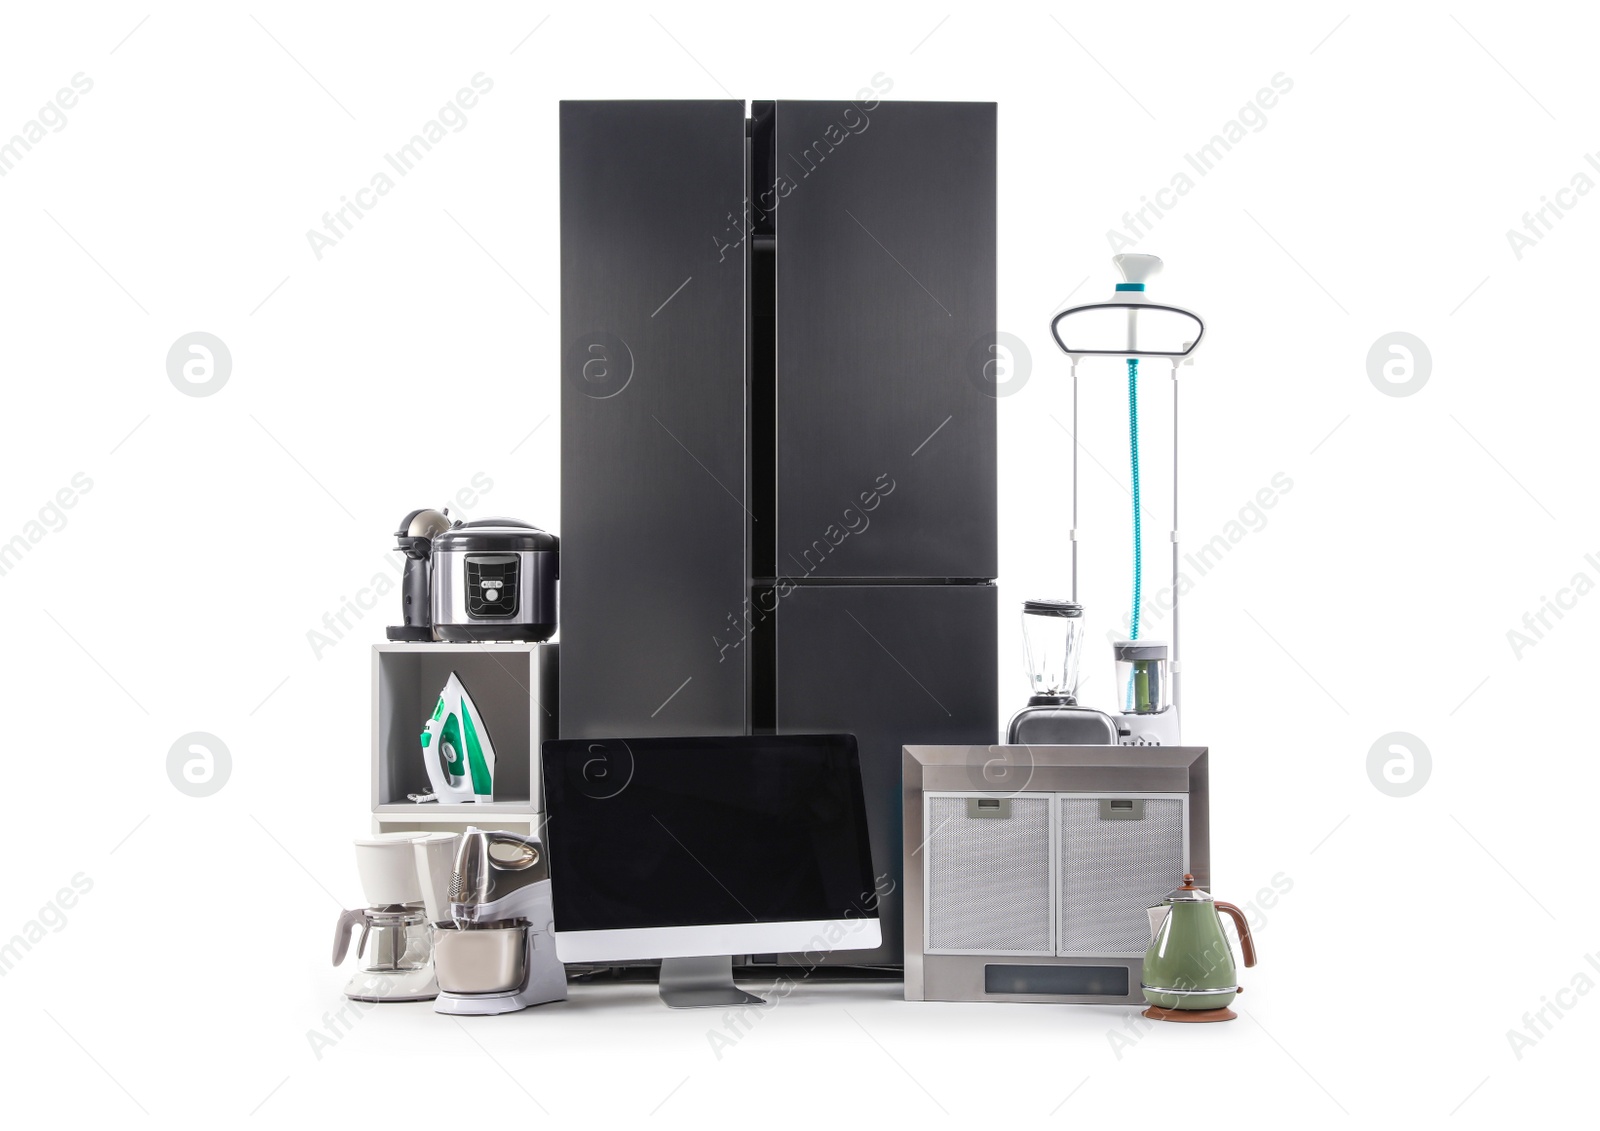 Photo of Modern refrigerator and domestic appliances isolated on white